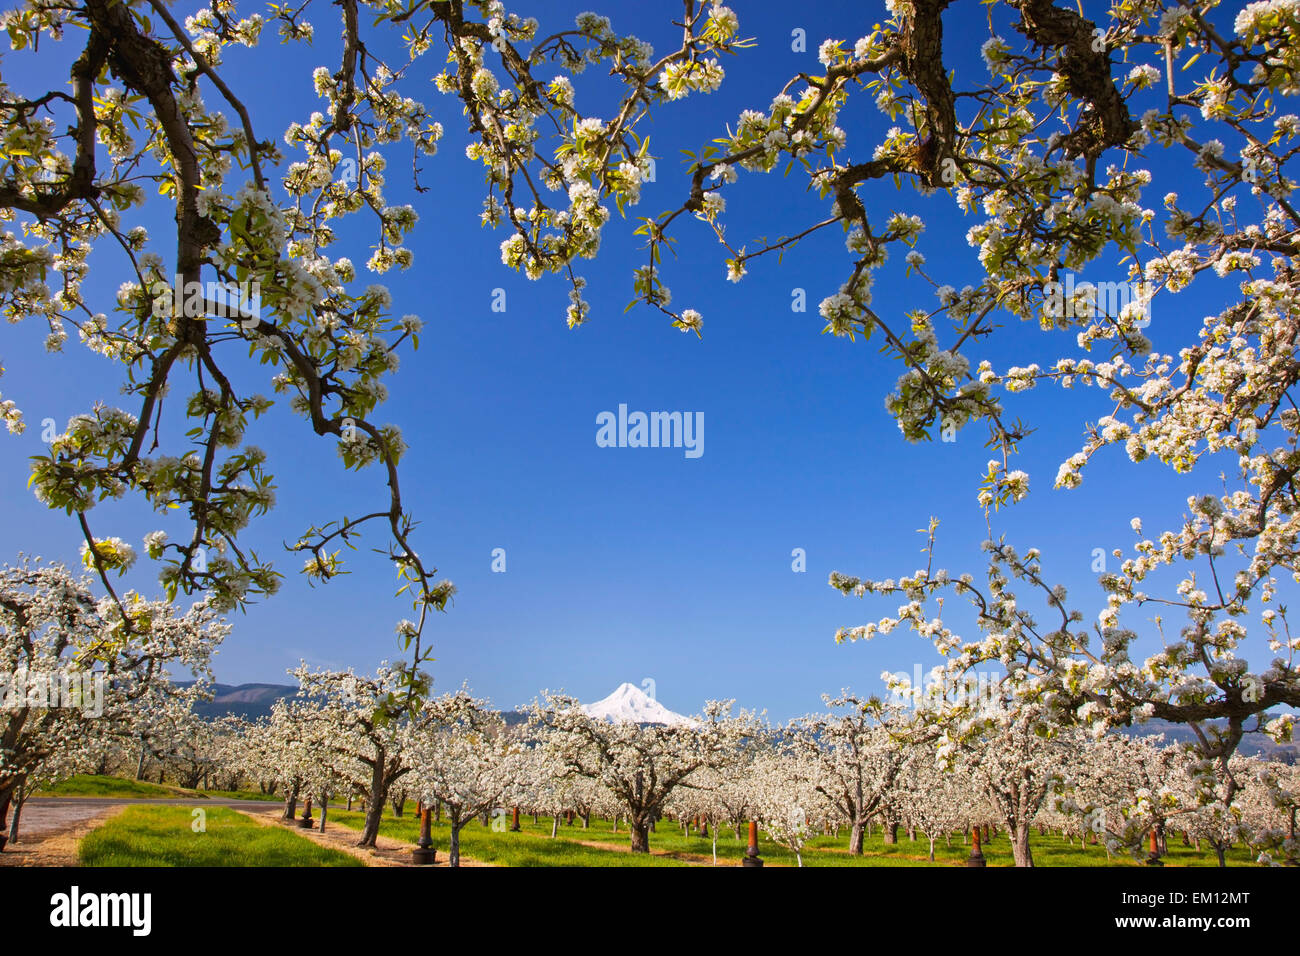 Apple Blossom Trees In Hood River Valley Columbia River With